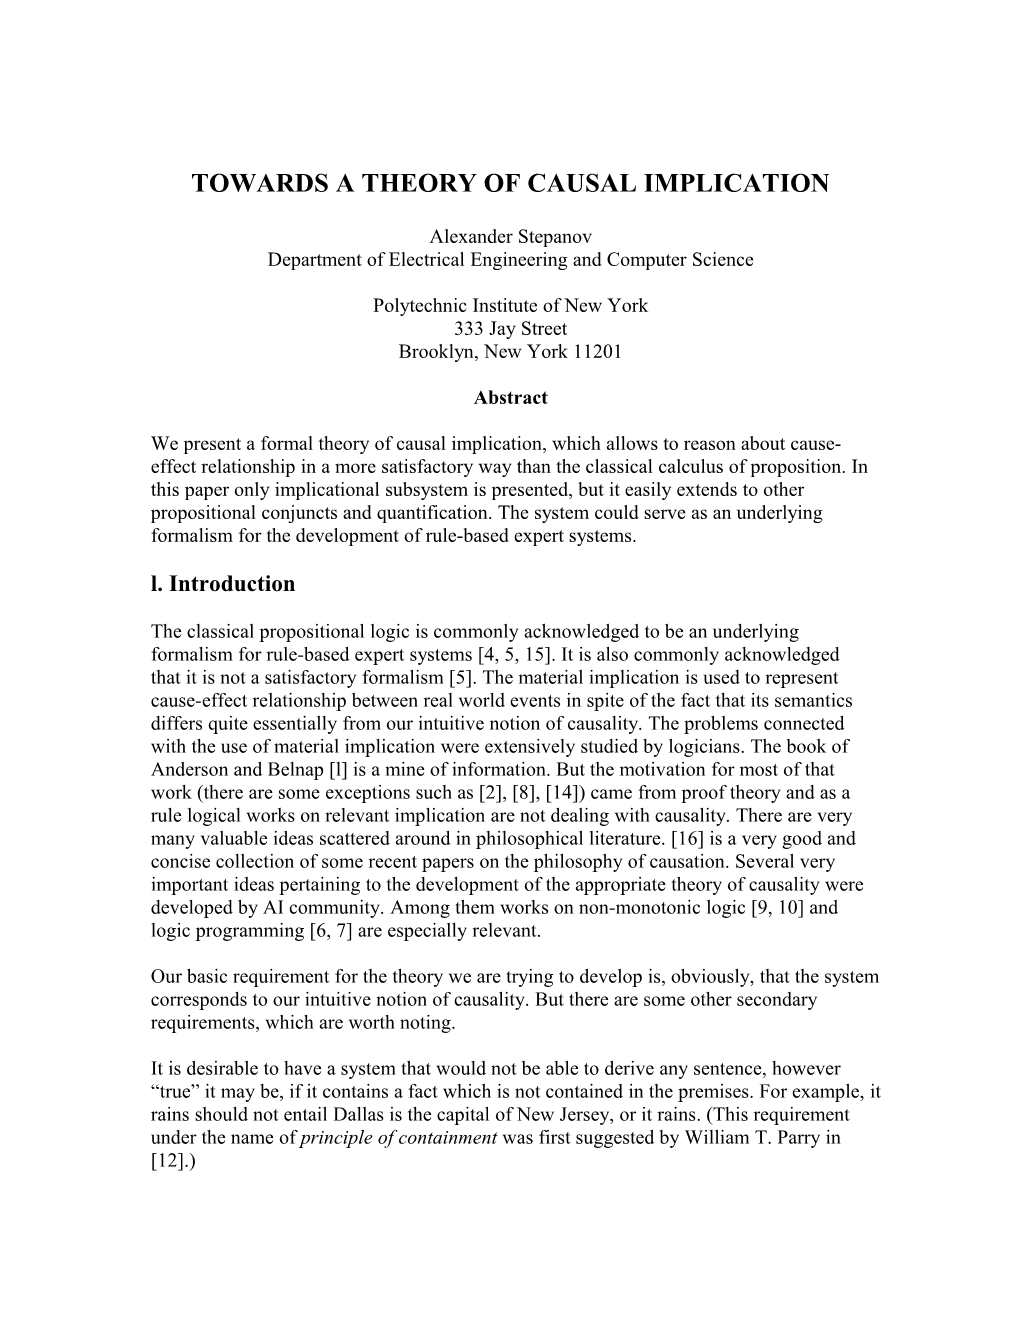 Towards a Theory of Causal Implication